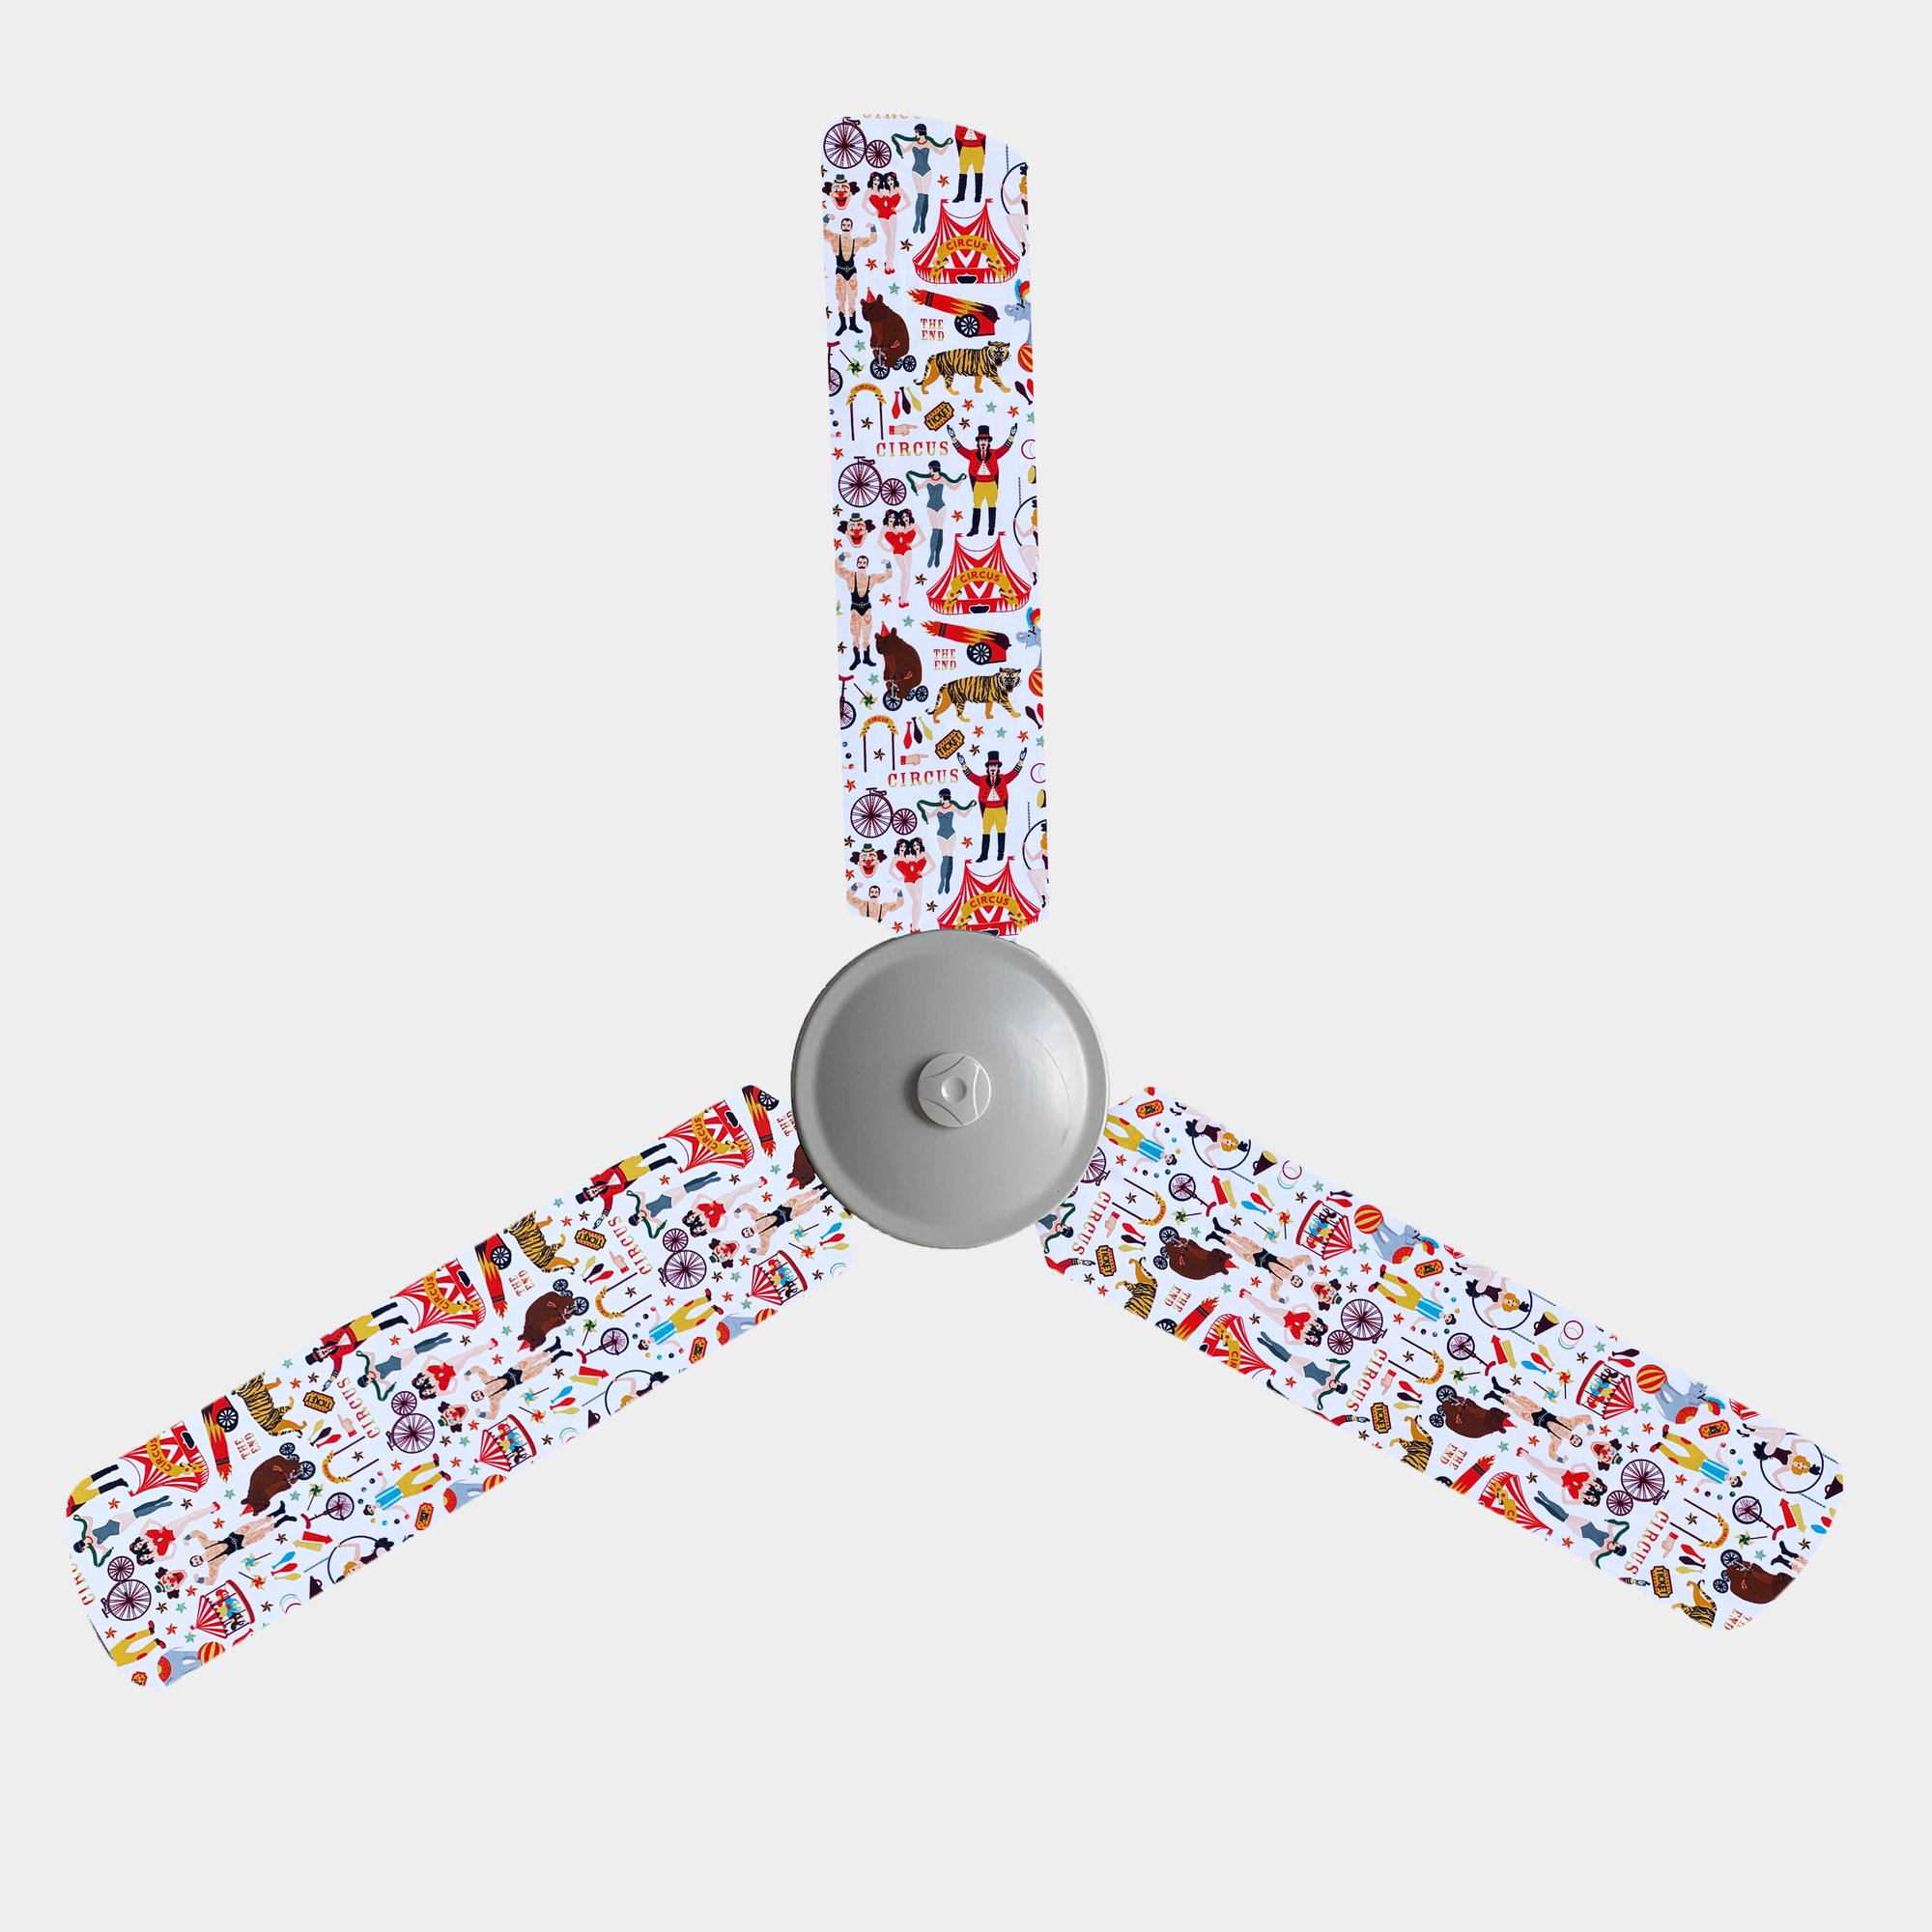 Circus themed fan blade covers on white background